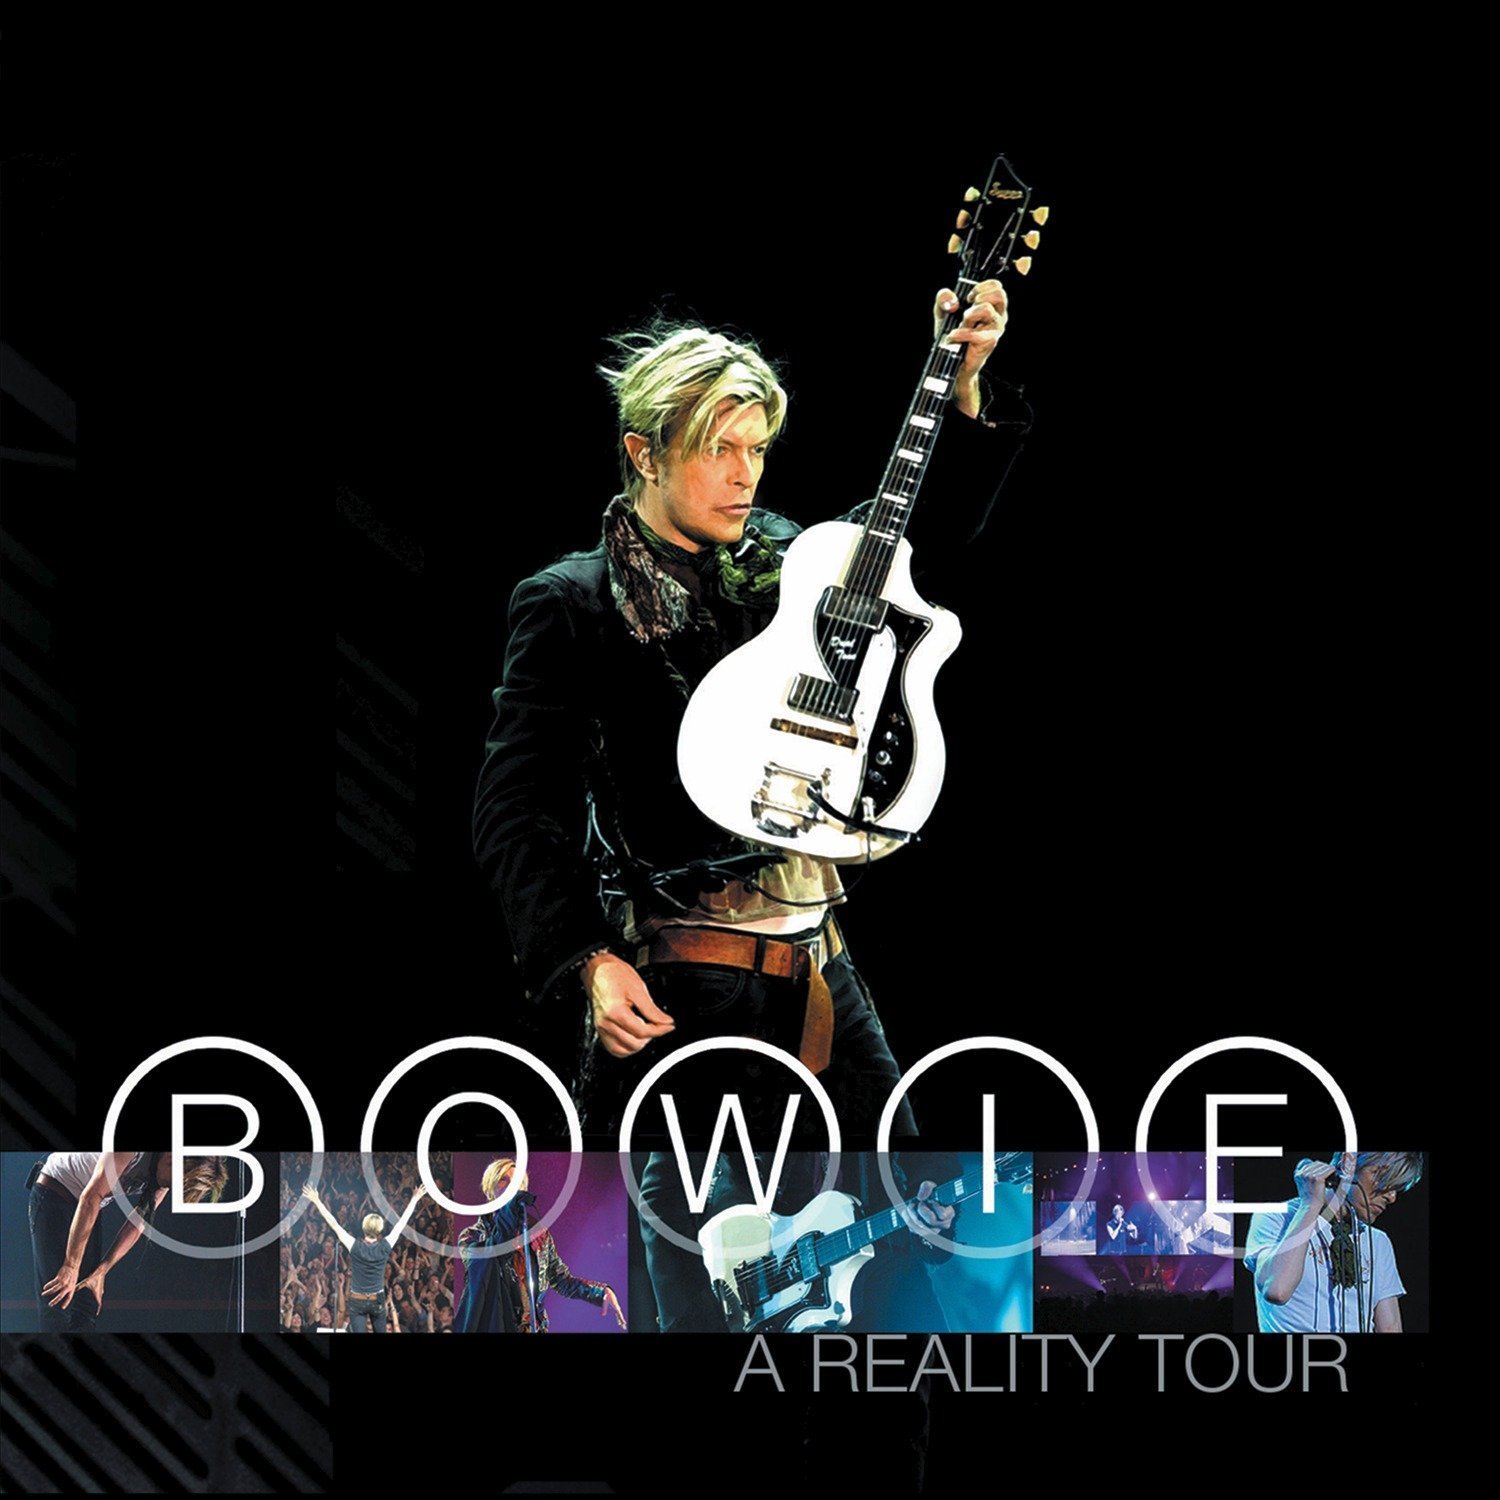 reality tour bowie dates